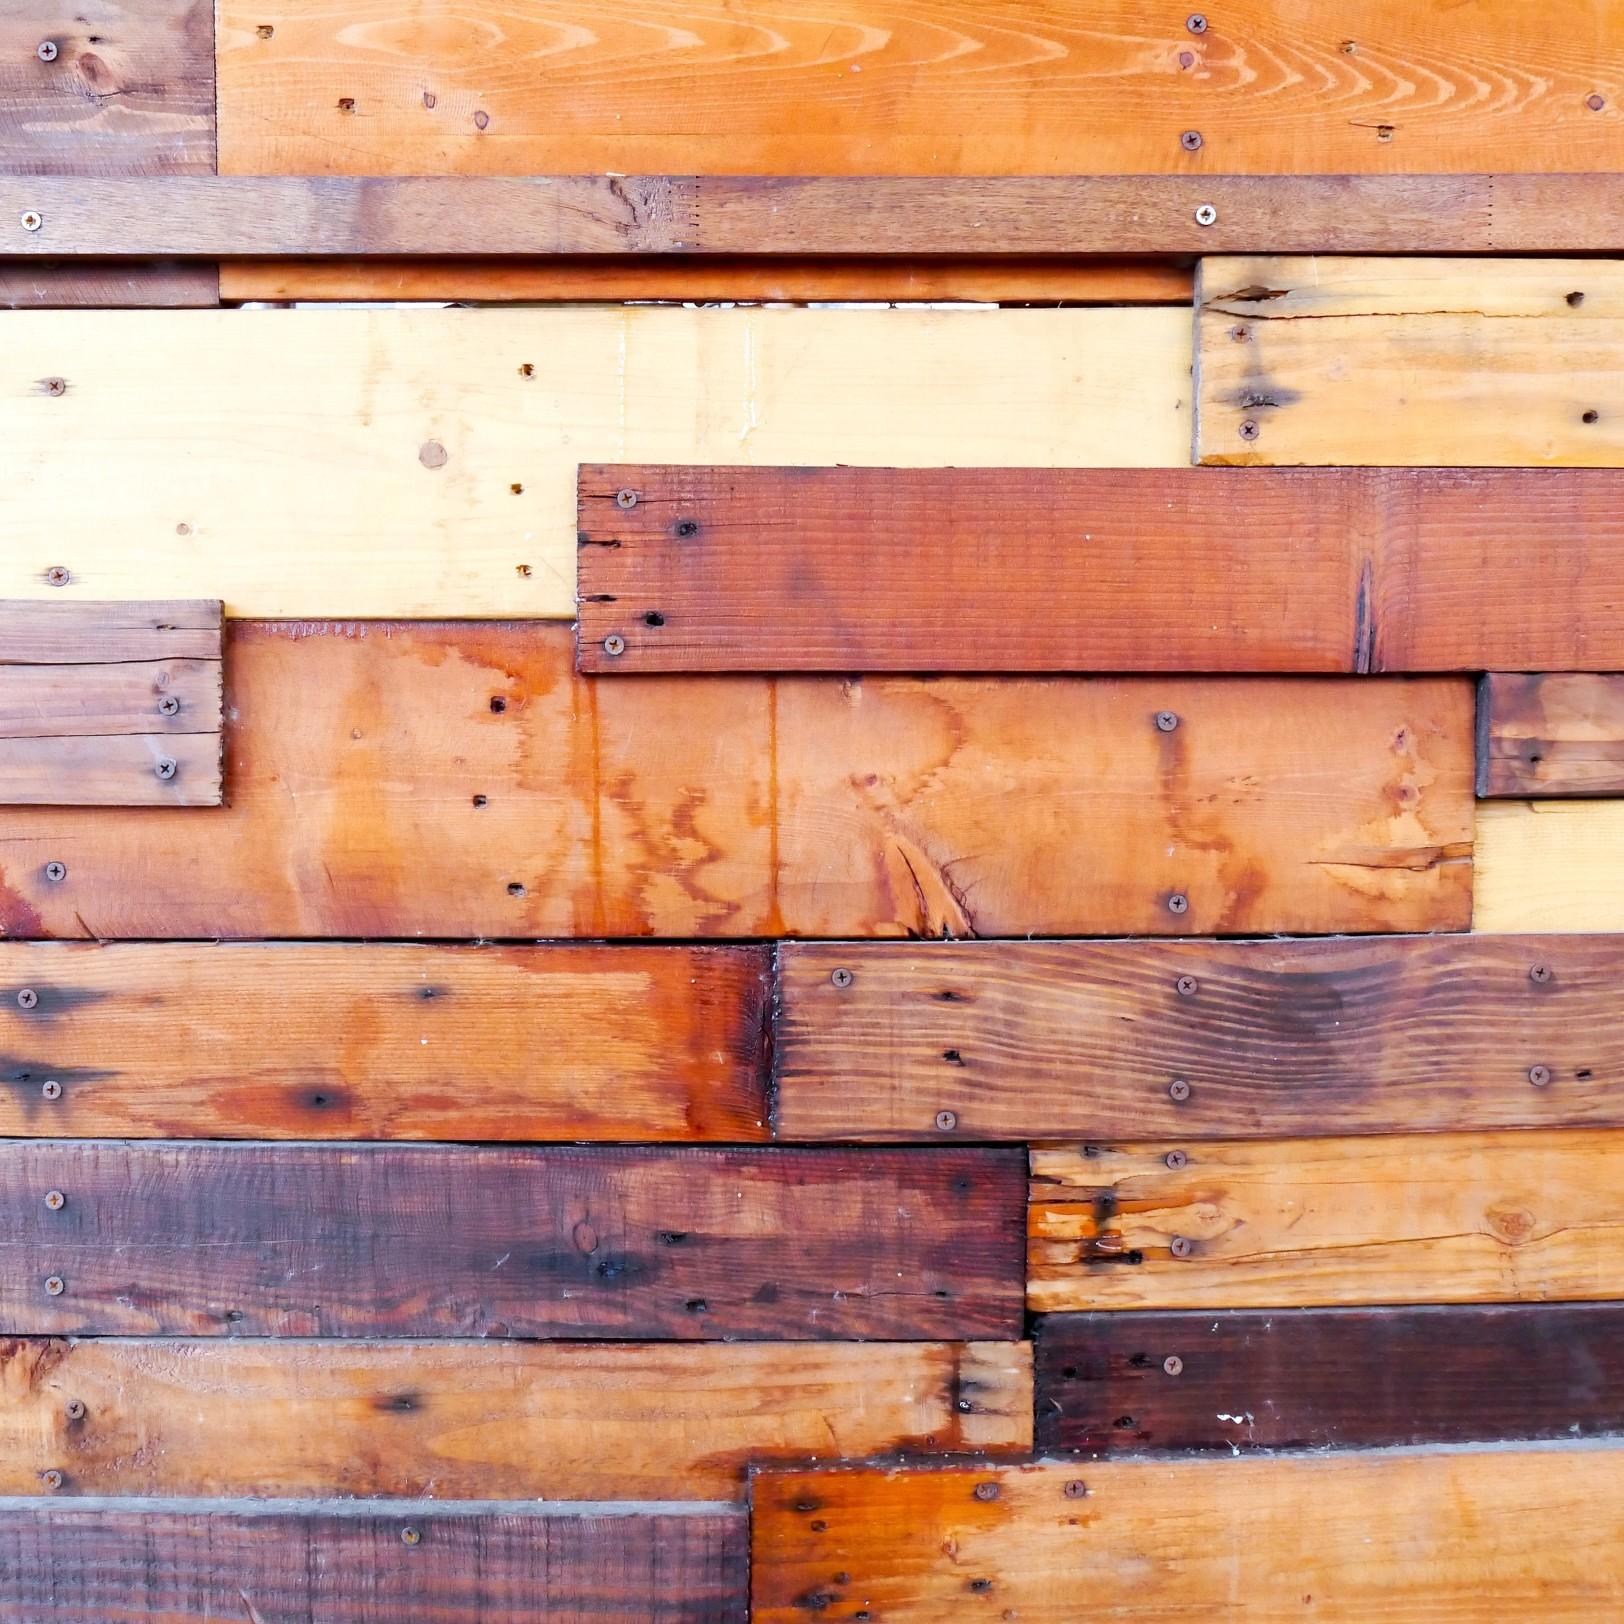 Wood planks of different sizes and colors arranged into a decorative fence.